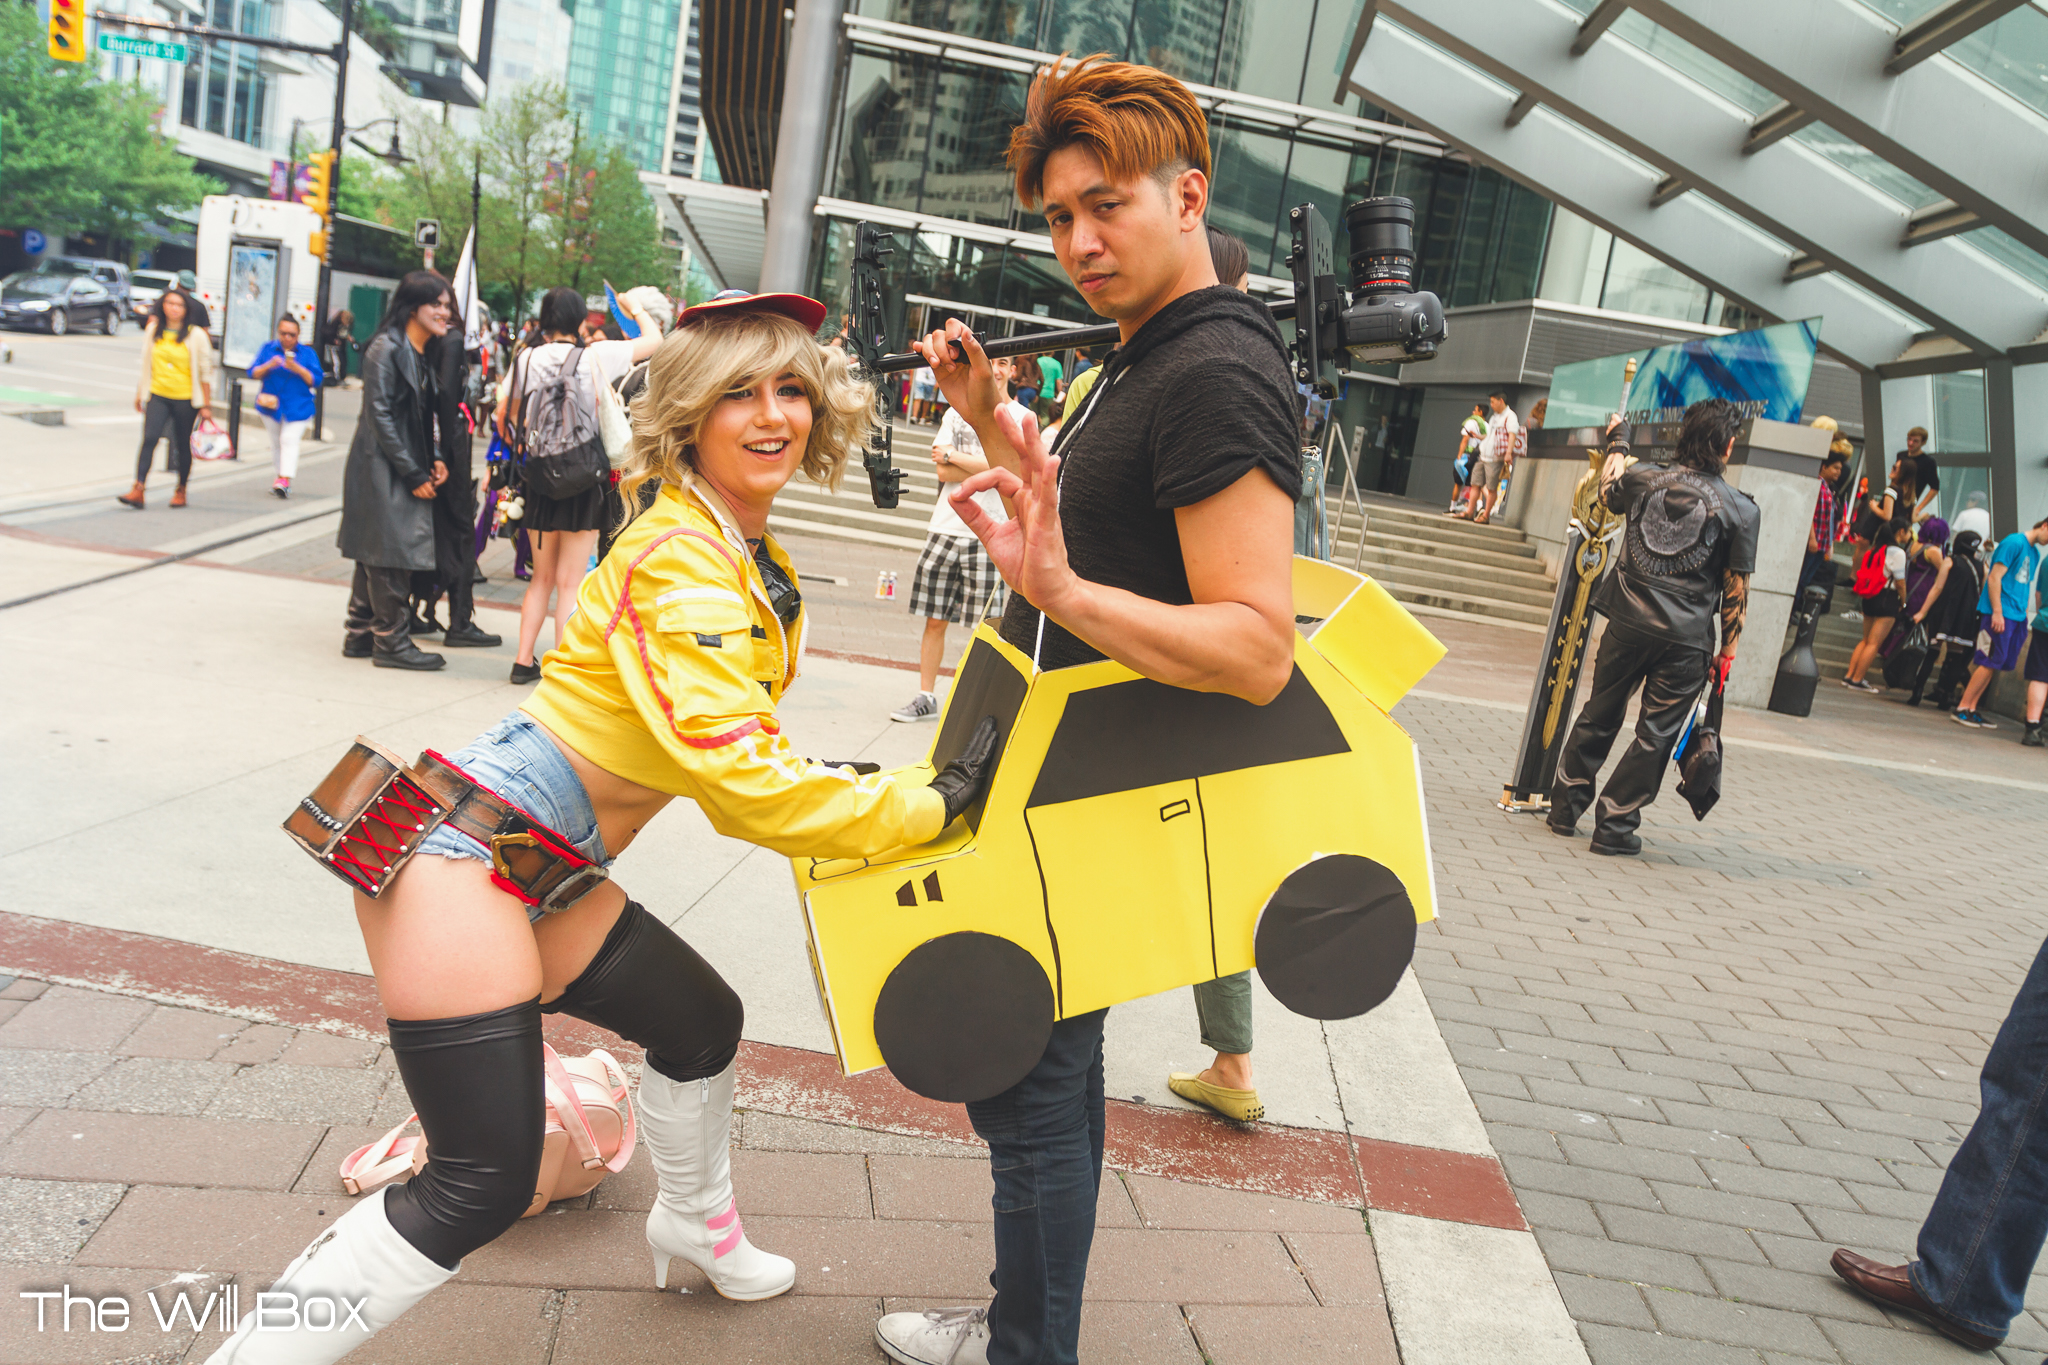 Vancouver Put On A Cosplay Show